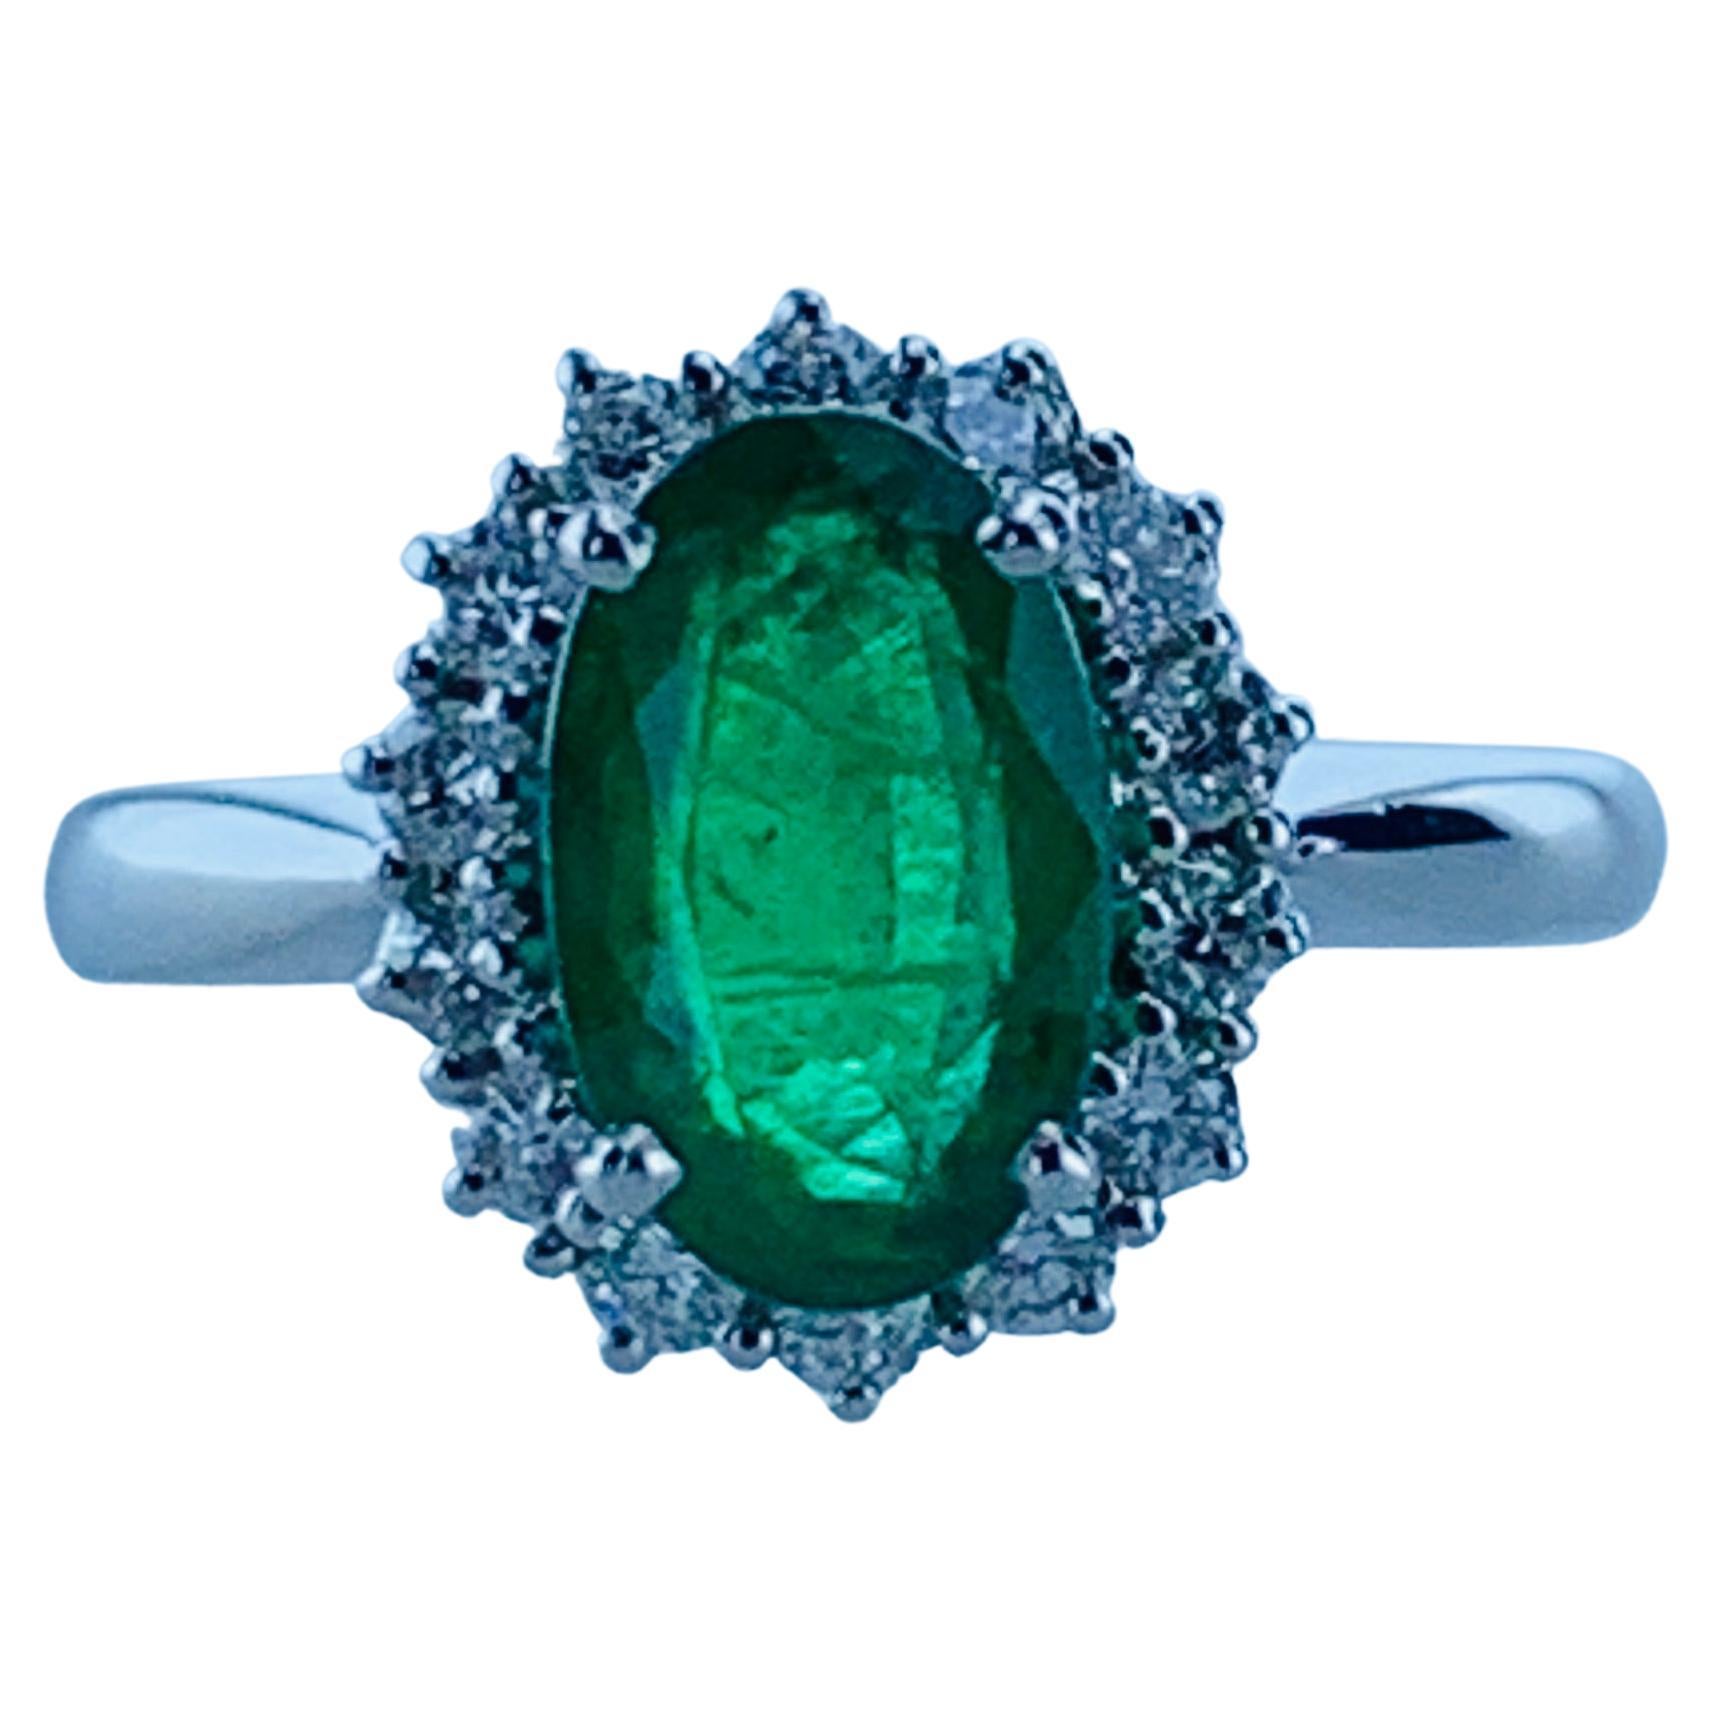 This Colombian Emerald 1.82 Carats and 0.37 Carat Diamond Halo Ring is set in 18Kt white Gold. It is bright and adds glamour and beauty to any finger. 
The circular Emerald sits within a halo of mini white bright Diamonds, giving a classic but fresh